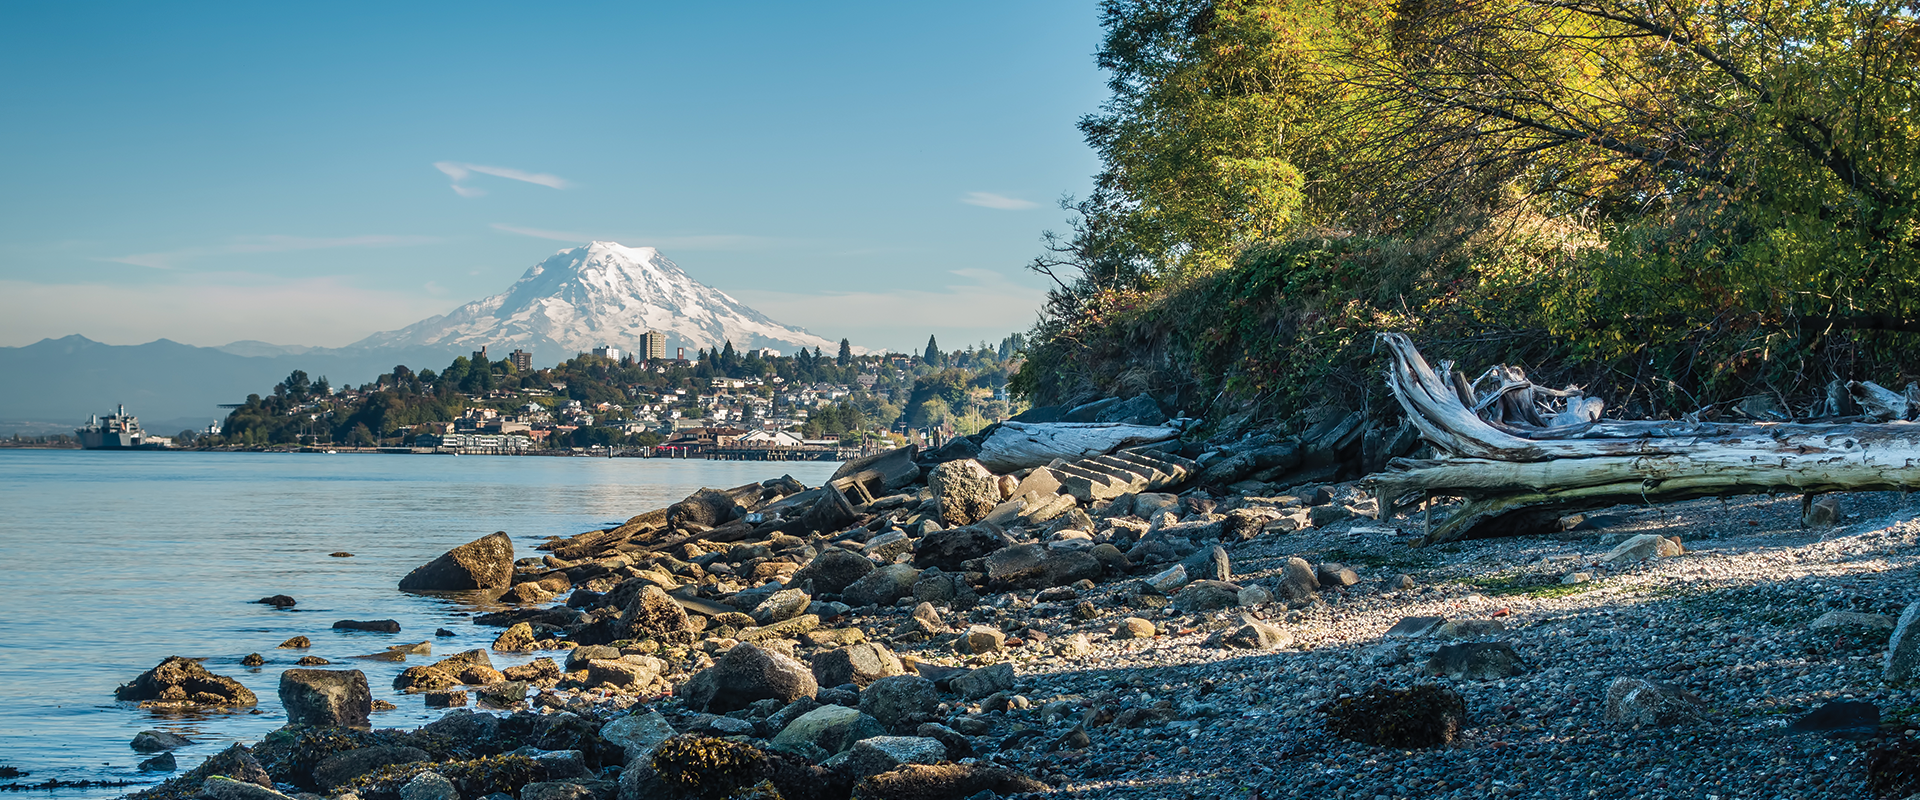 A Washington State beach shore and Mt. Rainier in the background